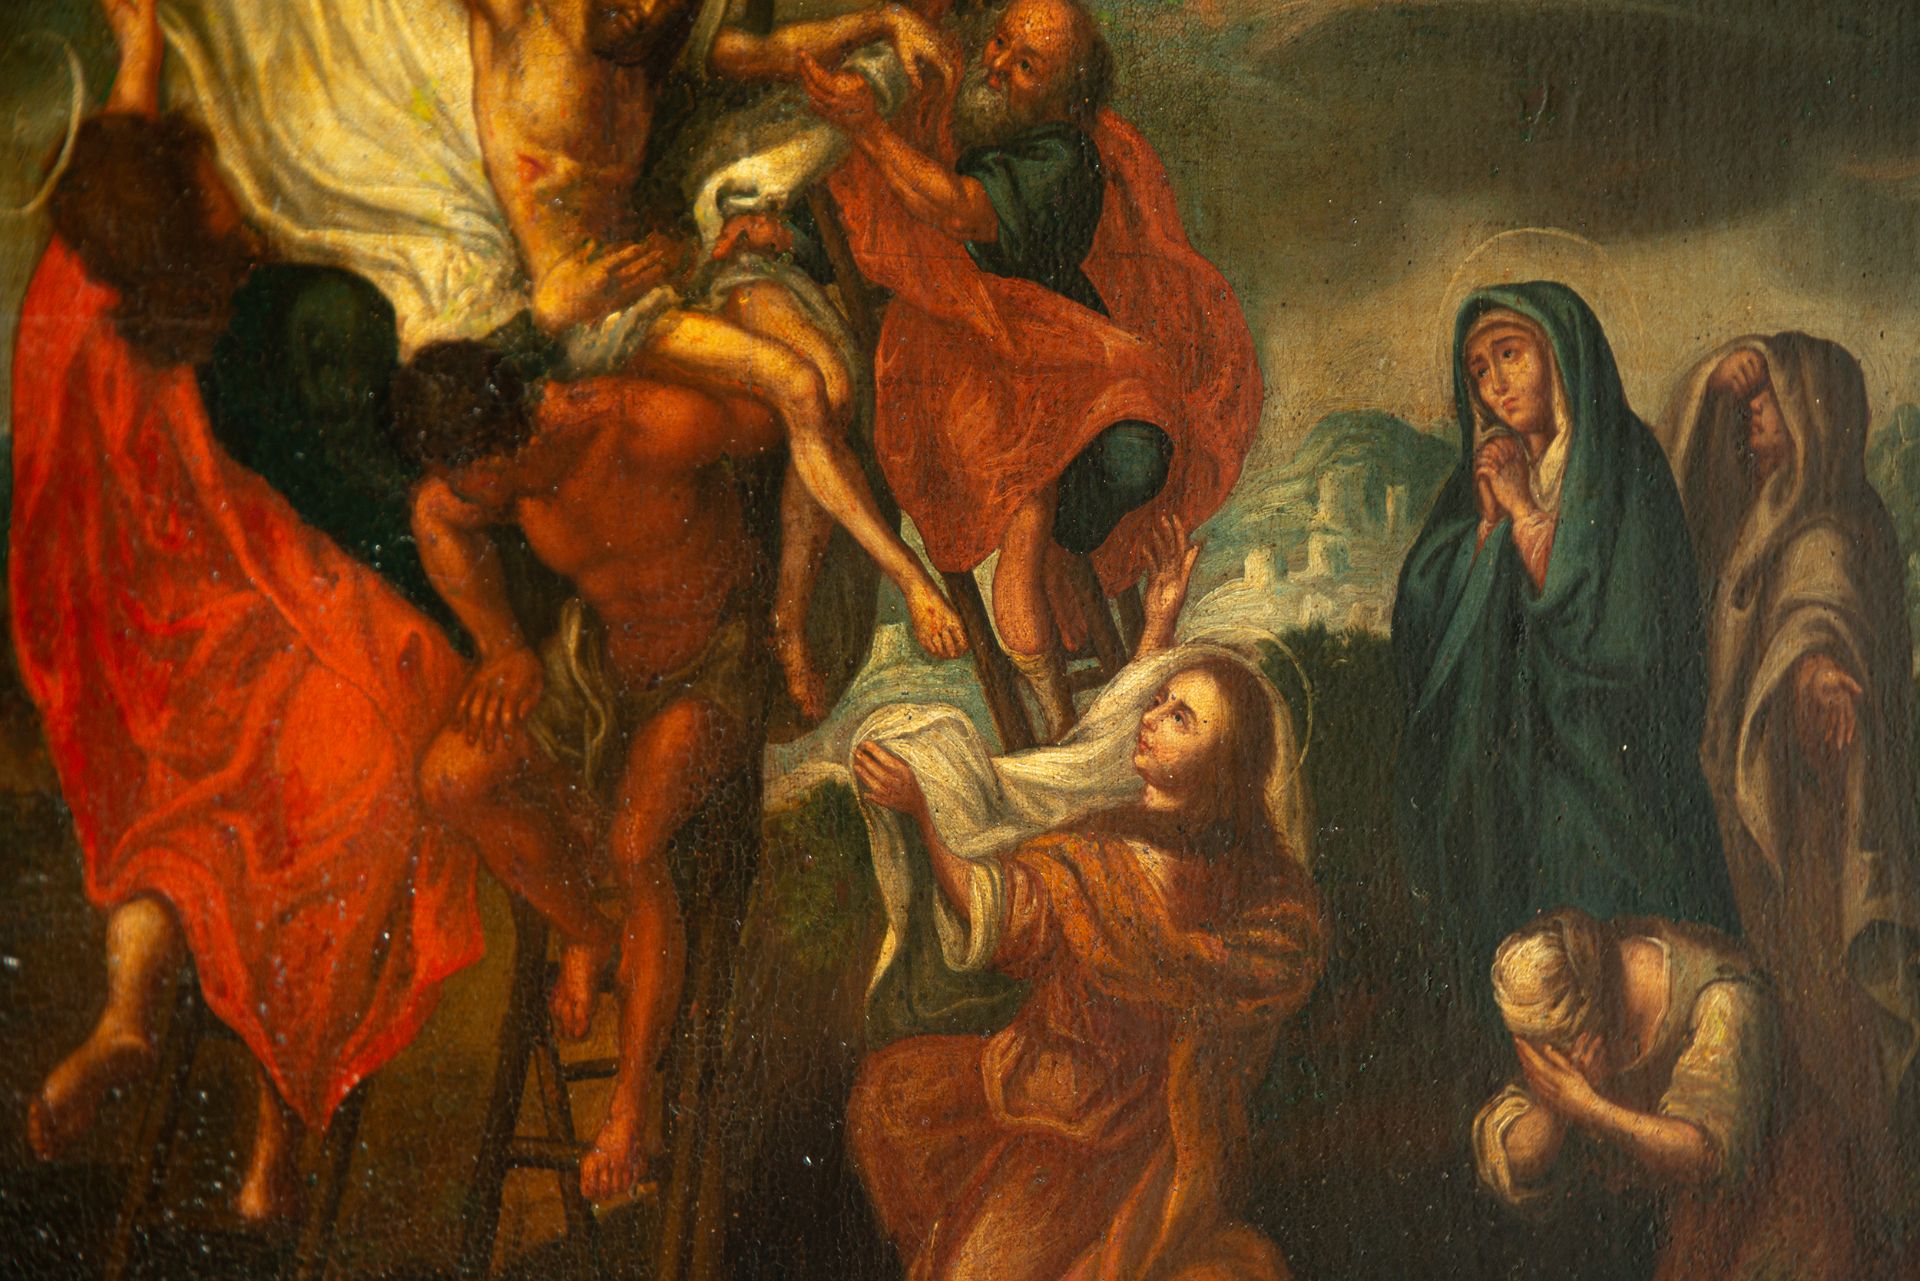 Jesus Descending from the Cross, Spanish school of the 17th century - Image 7 of 11